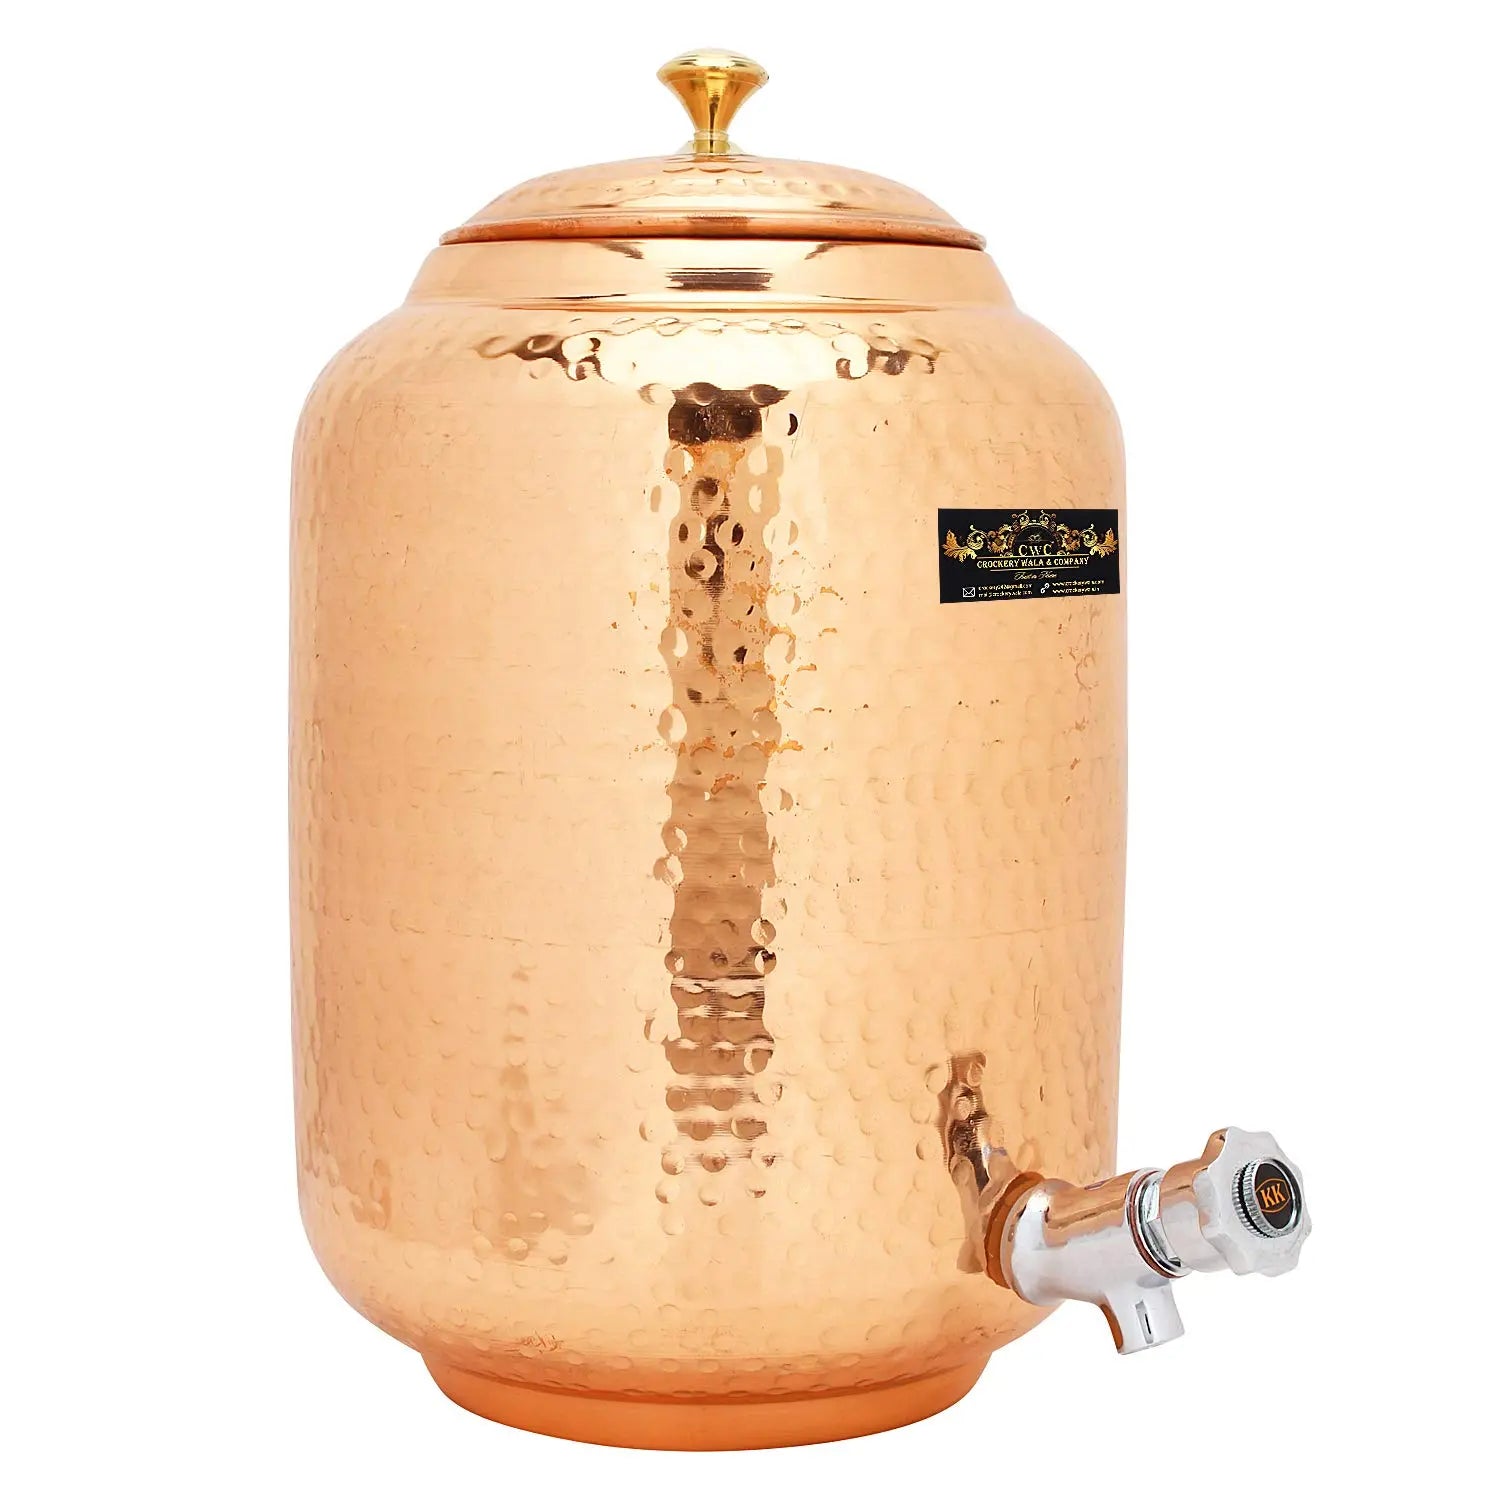 CROCKERY WALA AND COMPANY Jointless 16 Ltr Copper Water Dispenser and 4 Hammered Barrel Mugs - CROCKERY WALA AND COMPANY 